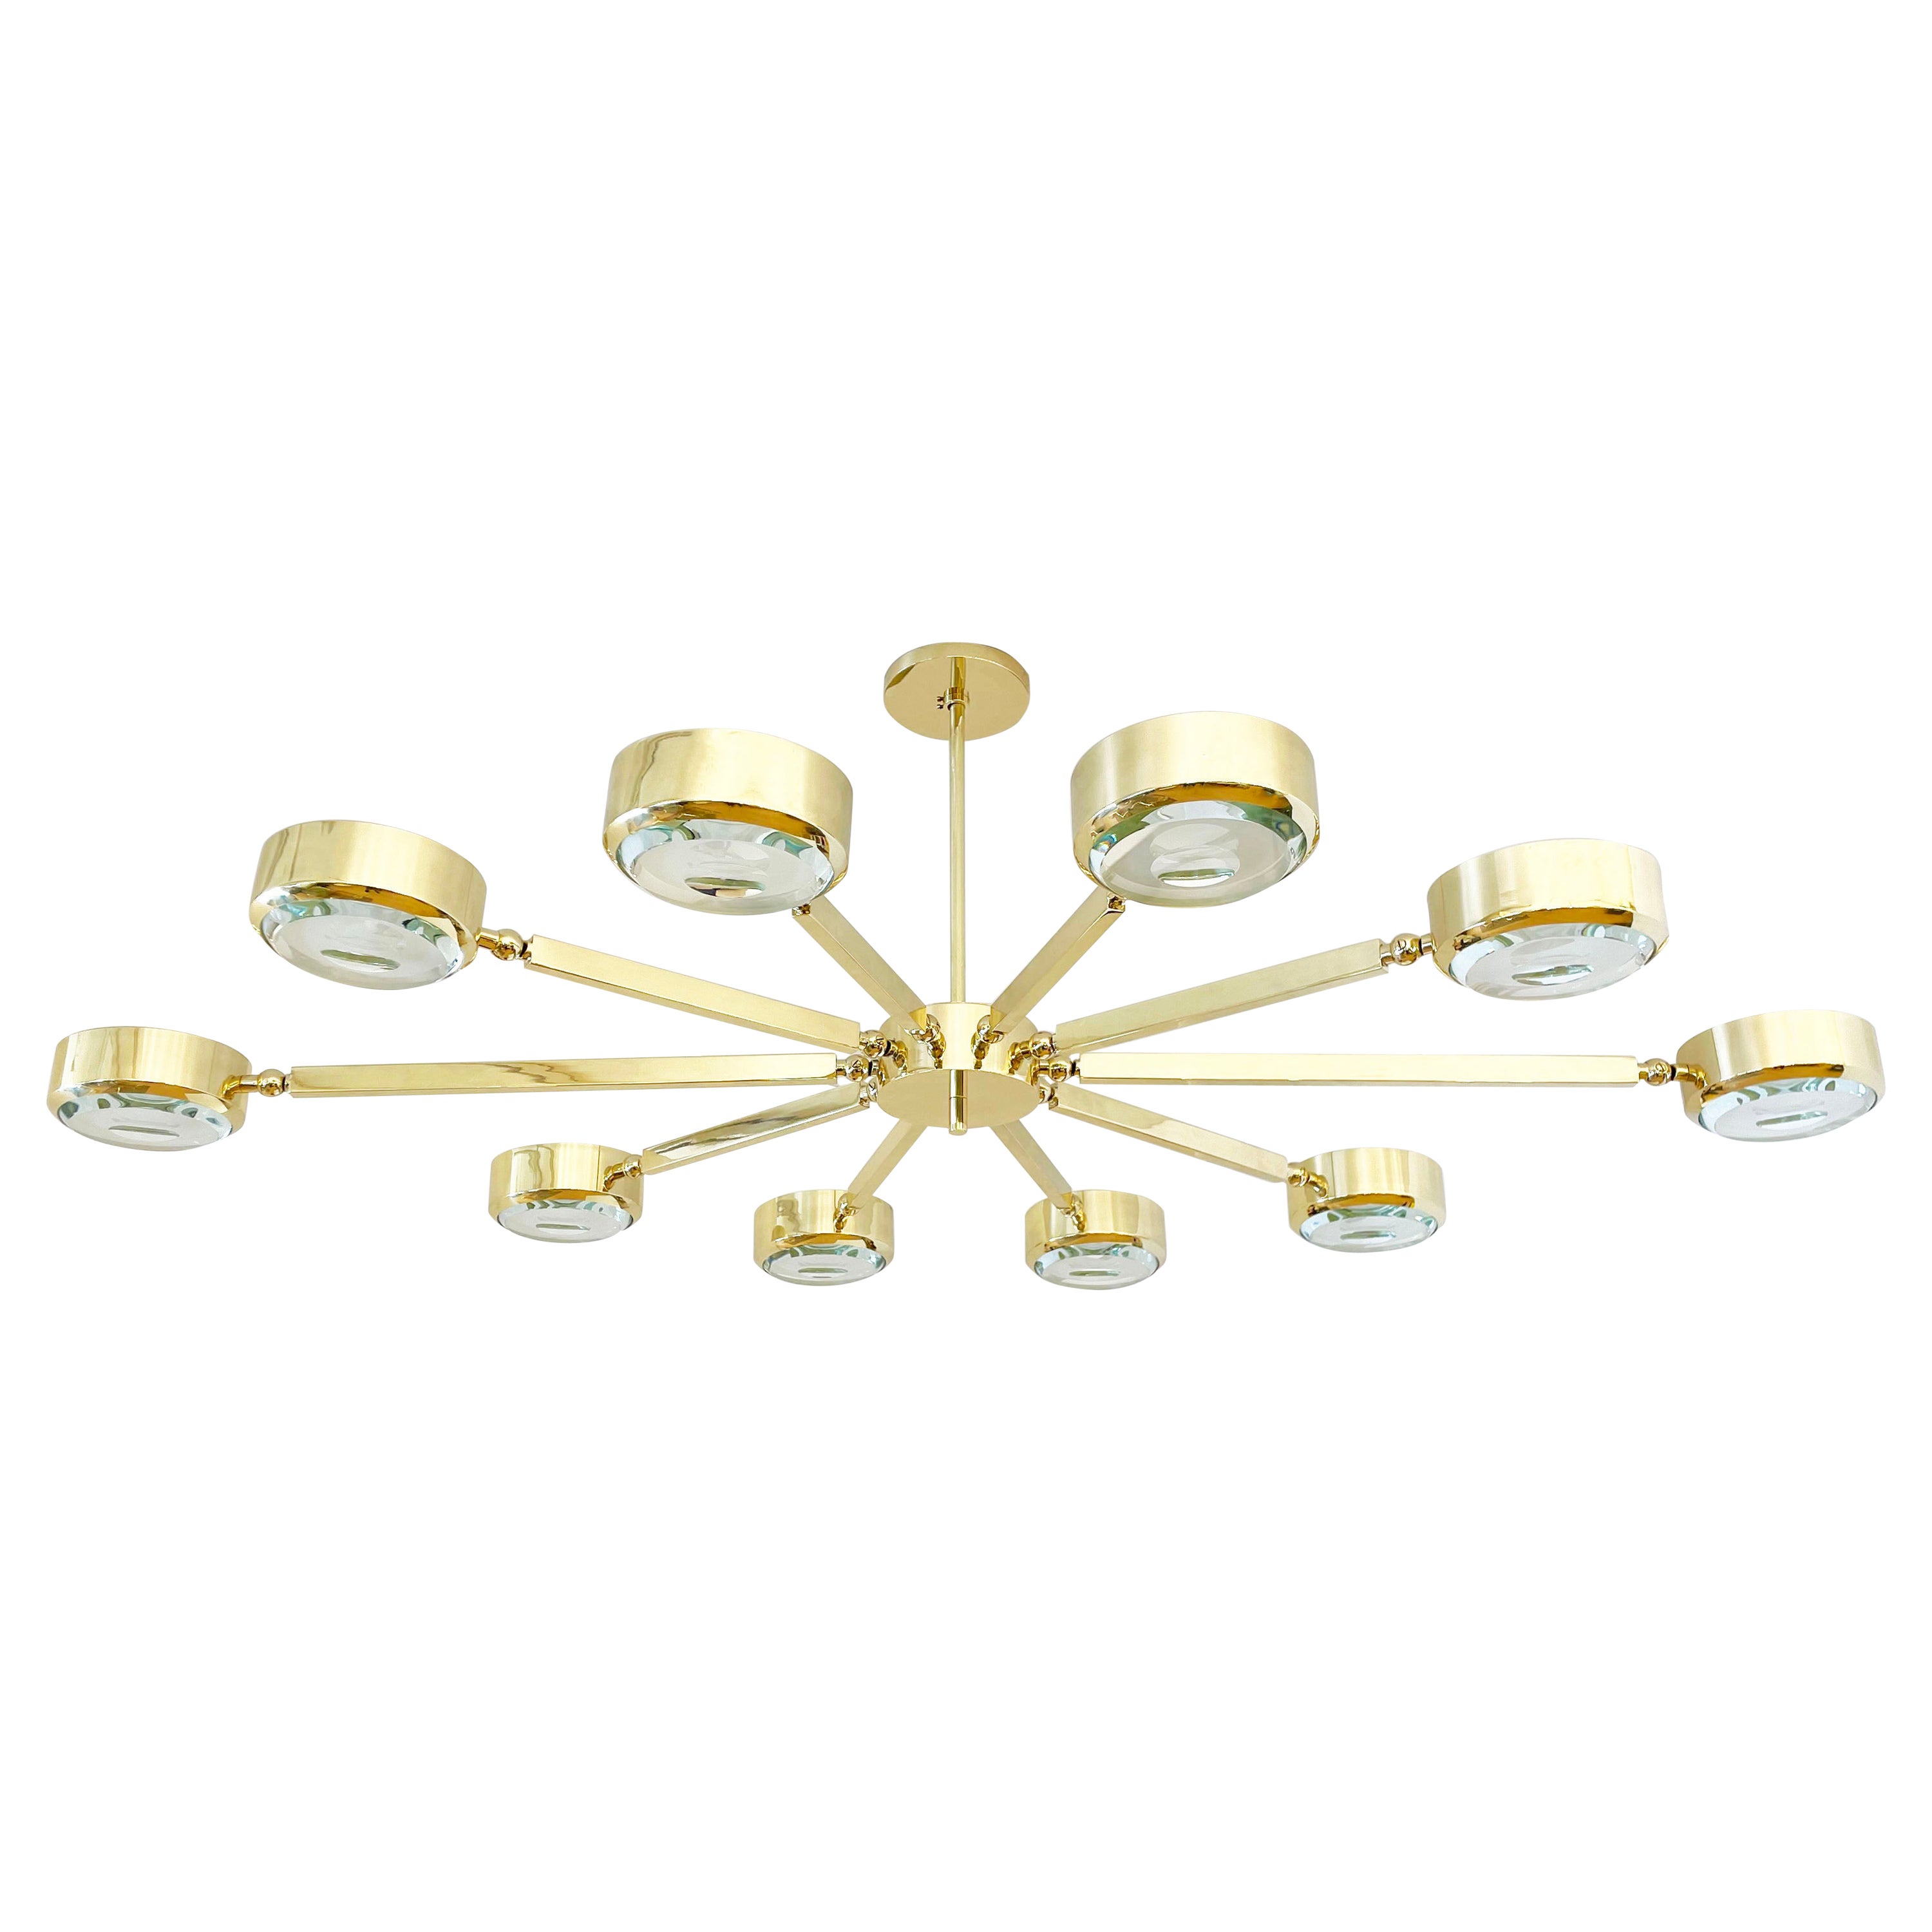 Oculus Oval Ceiling Light by Gaspare Asaro- Polished Brass with Carved Glass